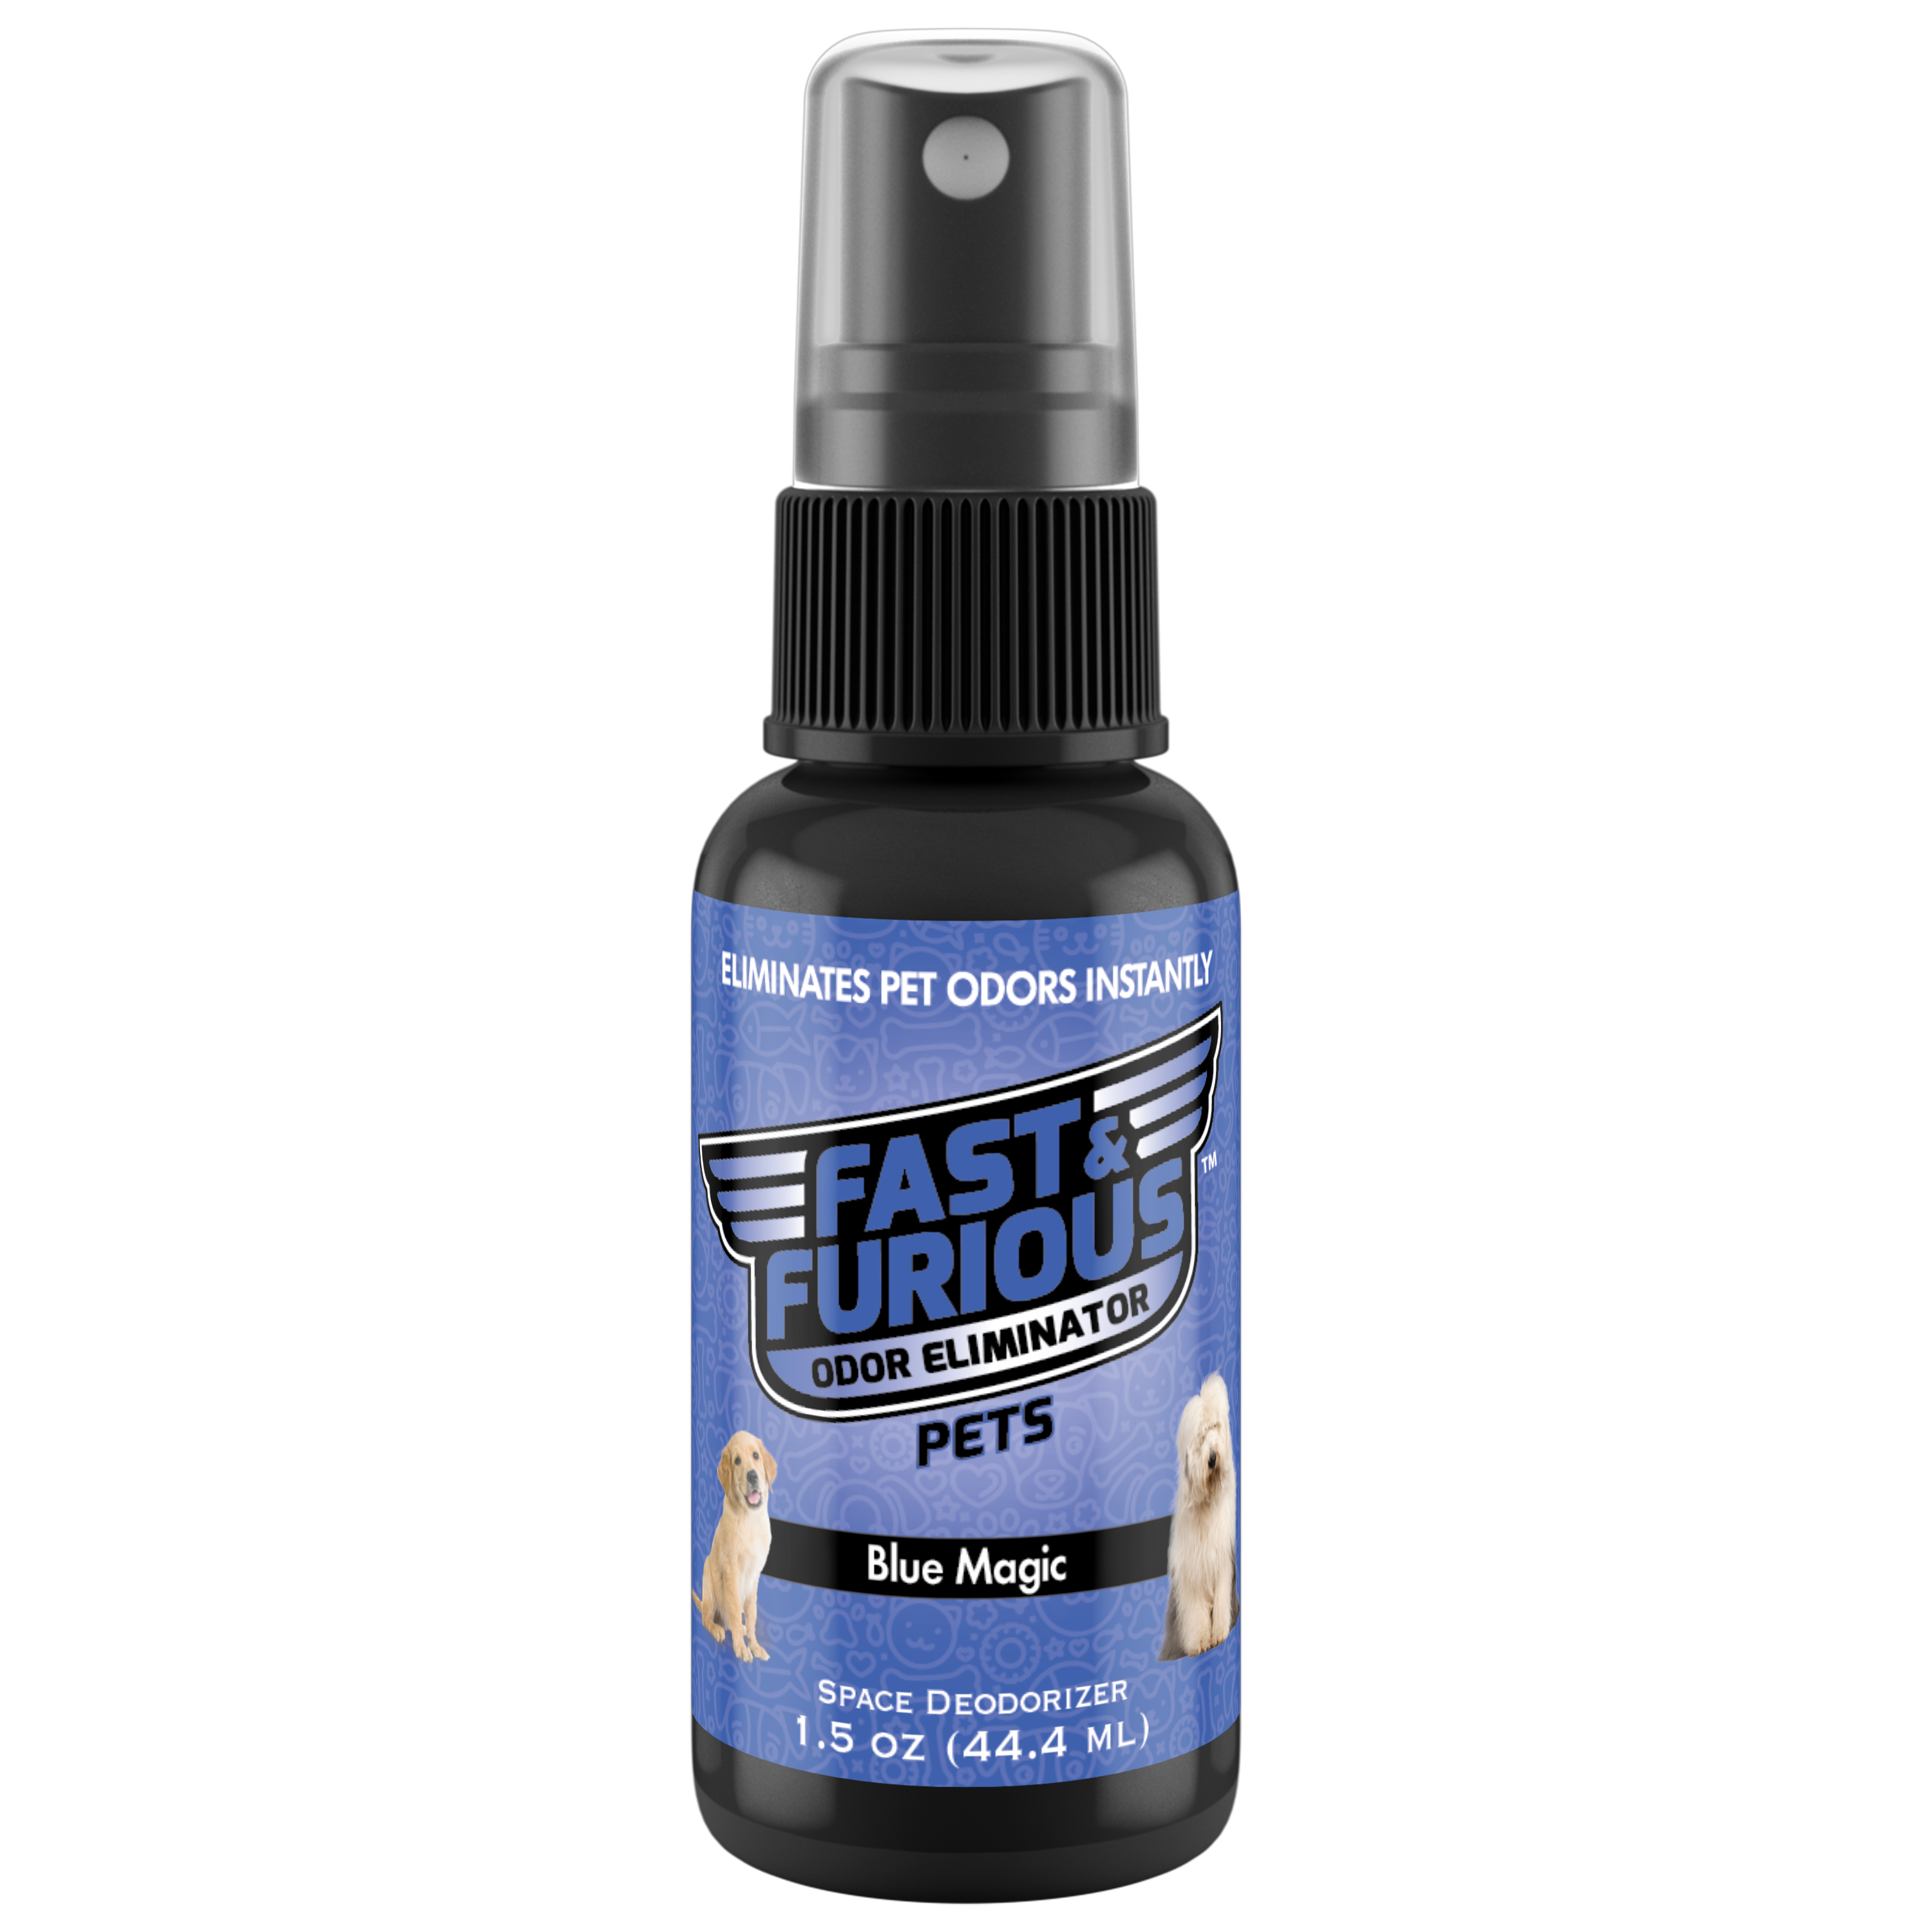 Fast and Furious Pets Odor Eliminator - Blue Magic Scent